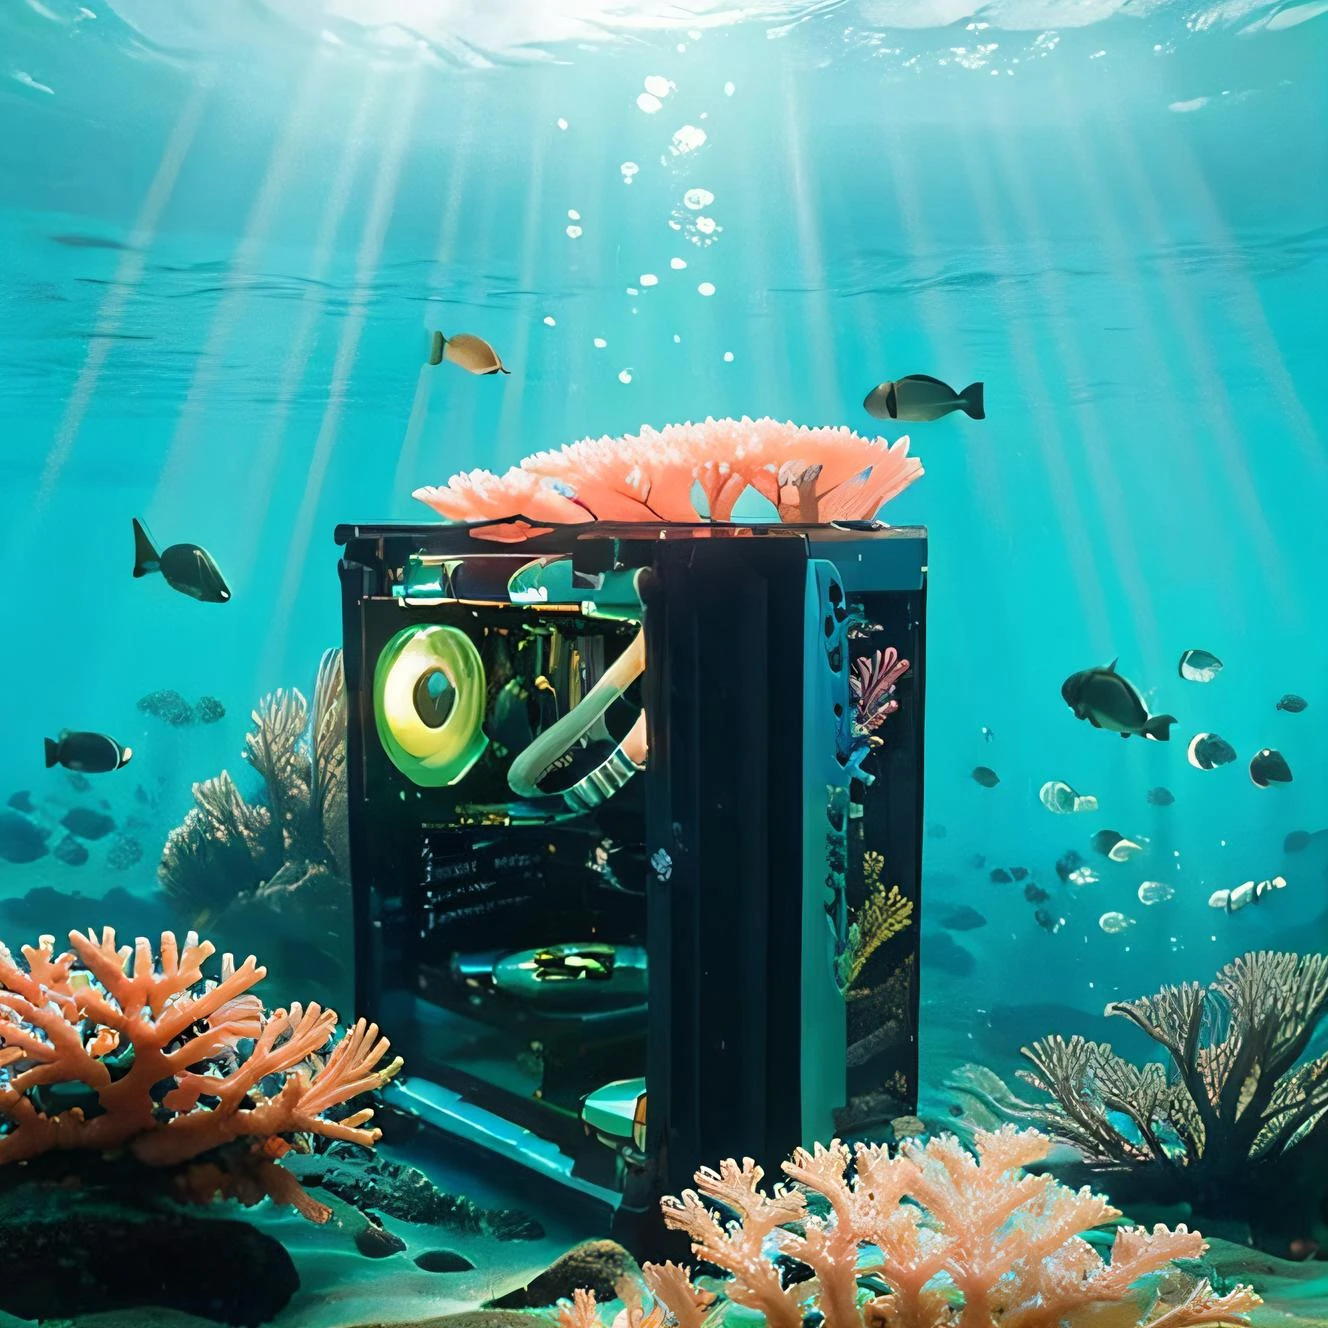 no humans, Computer Case,color fan,((underwater)),(beautiful detailed water),((coral)),dynamic angle, floating,(detailed light),floating hair,(splash),((fishes)),leaves dress, feather, nature,(sunlight),(underwater forest),(bloom),(detailed glow),drenched, seaweed, fish,(((Tyndall effect))),